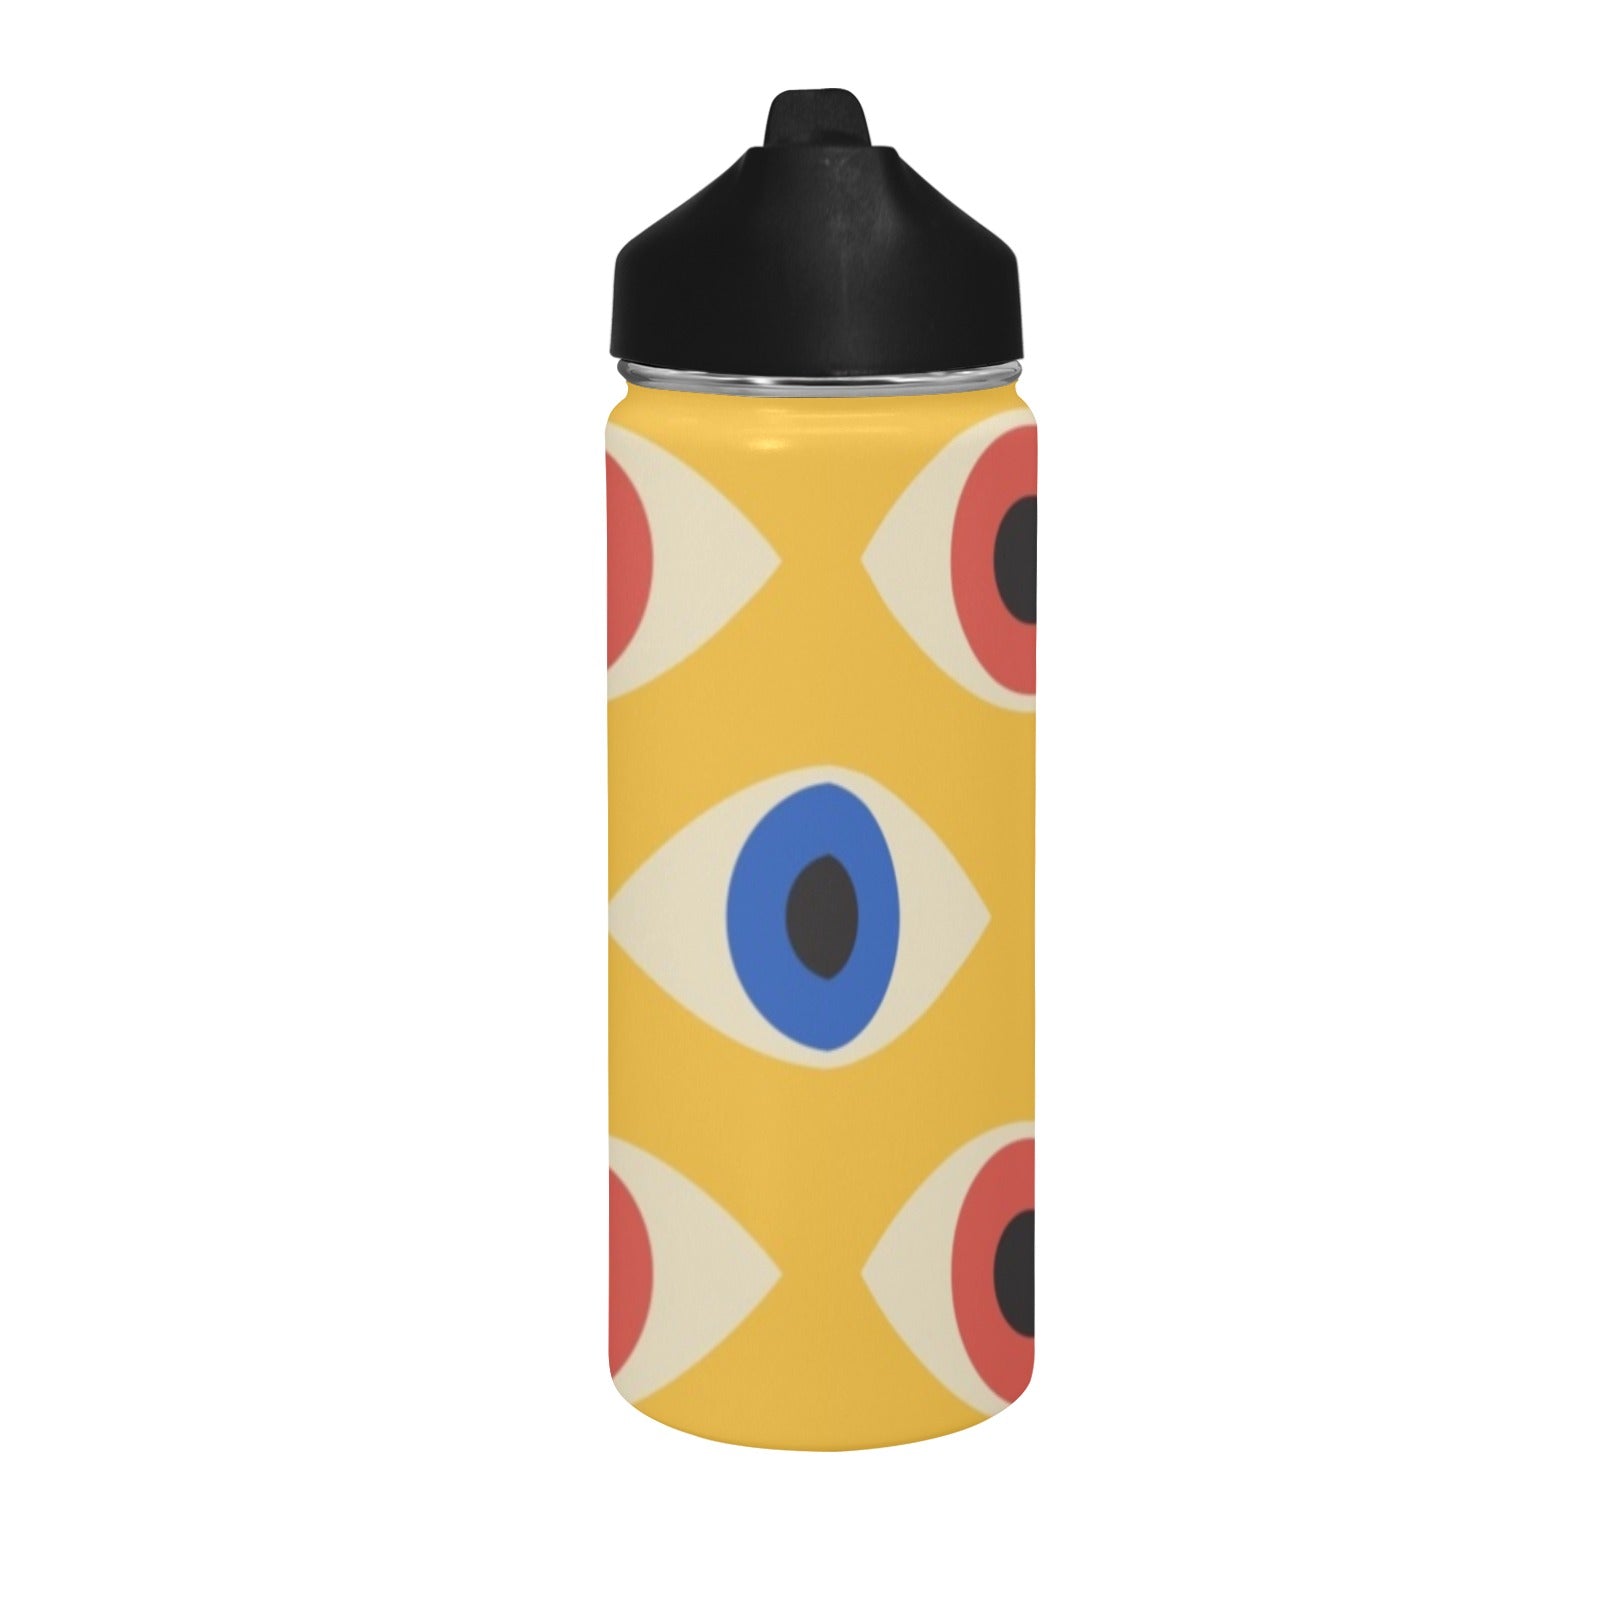 Eyes on Yellow - Insulated Water Bottle with Straw Lid (18 oz) Insulated Water Bottle with Straw Lid